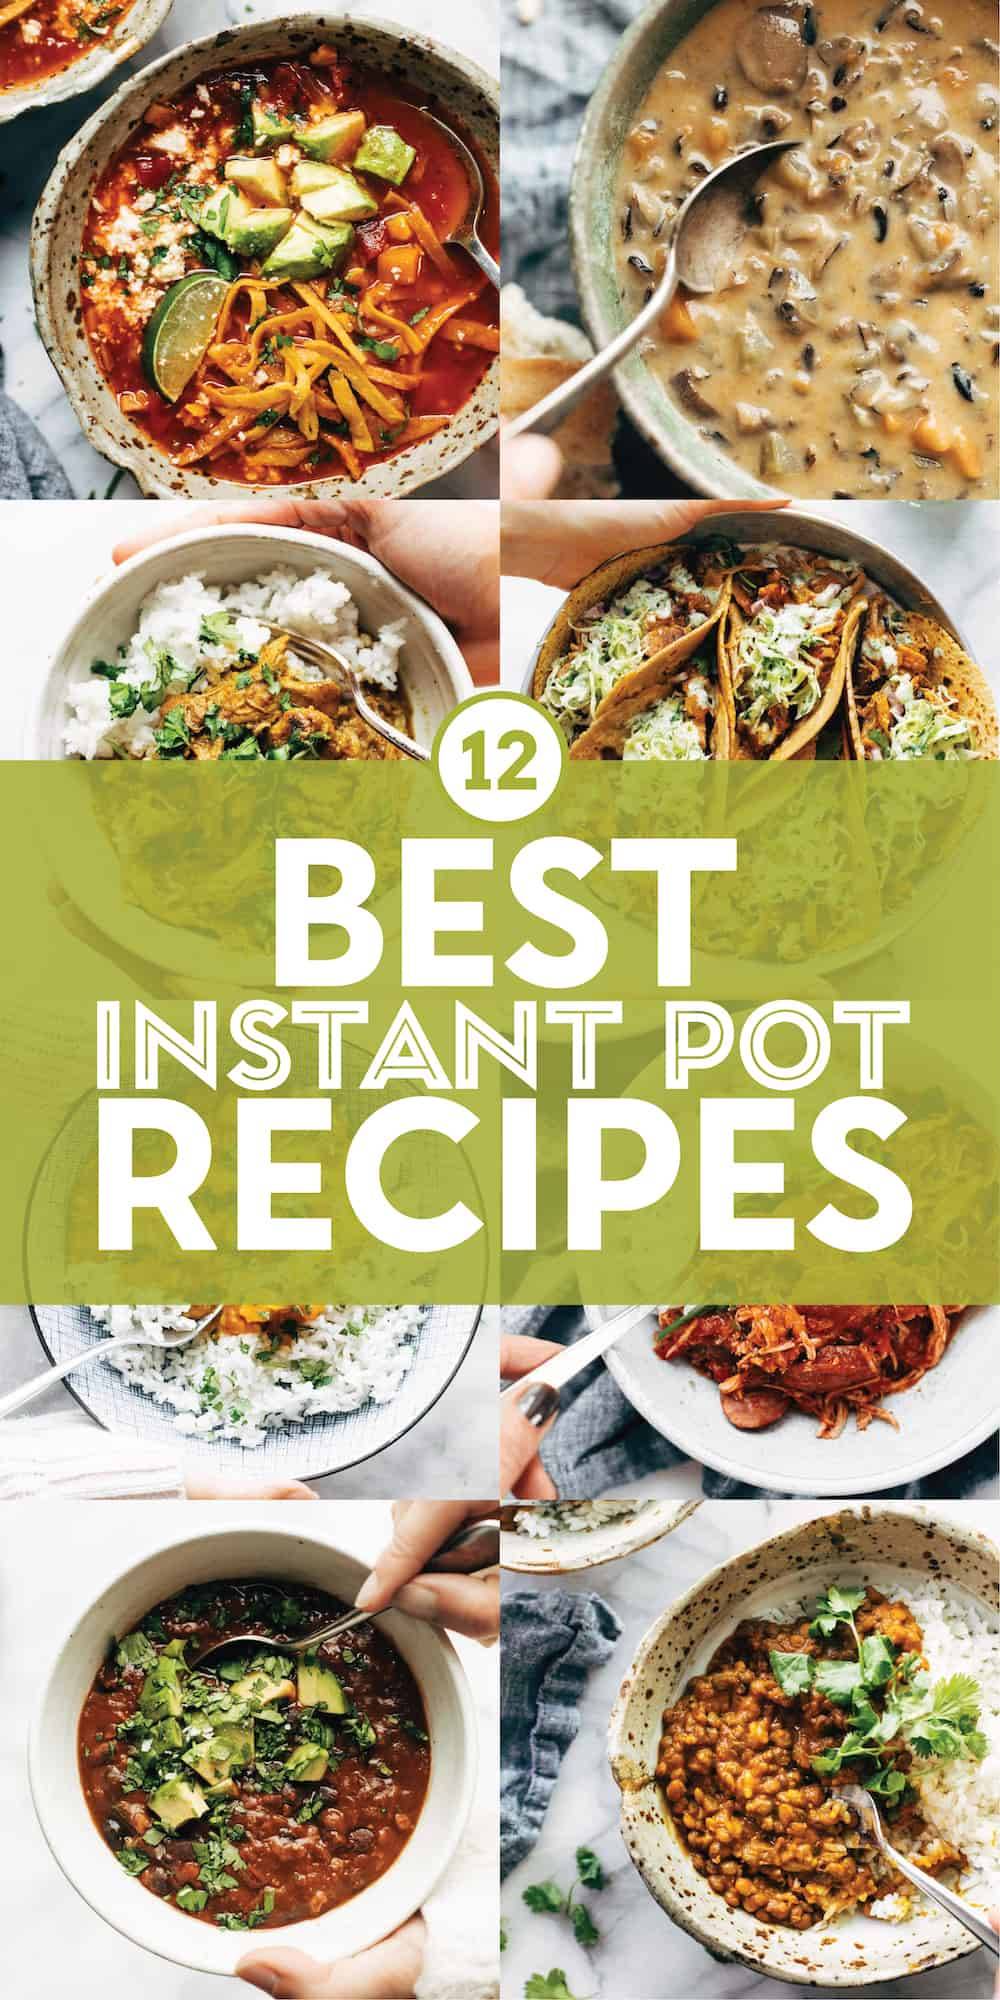 12 Favorite Instant Pot Soup Recipes - Pinch of Yum